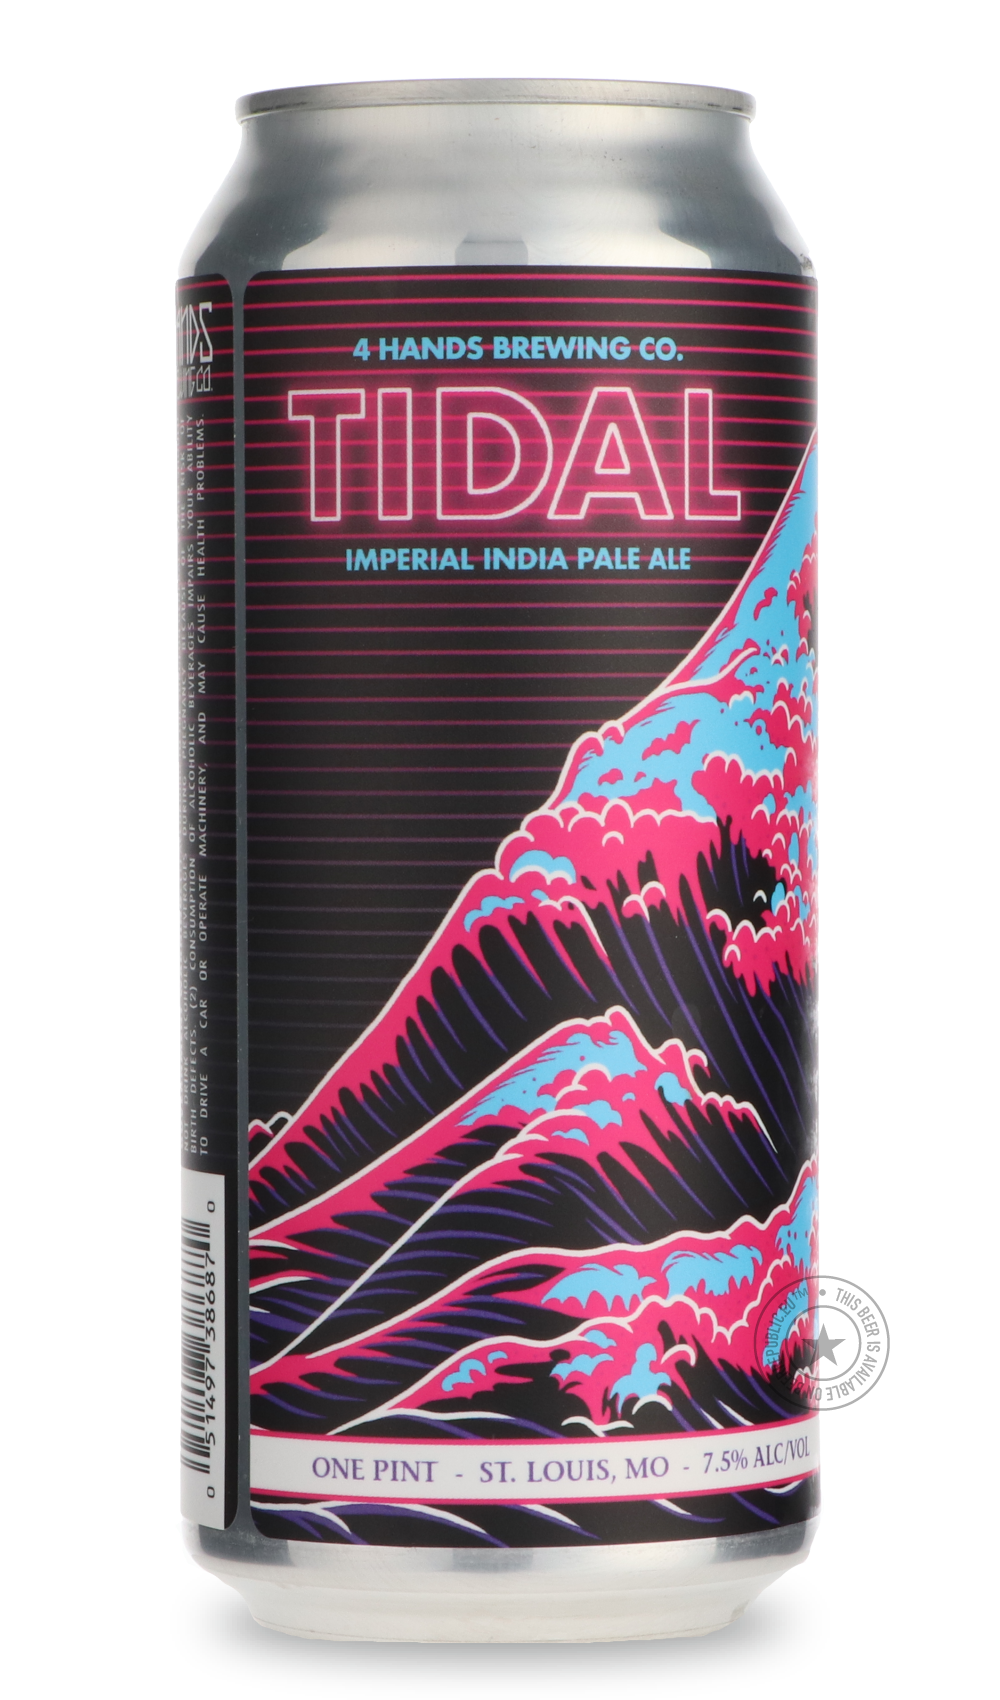 -4 Hands- Tidal-IPA- Only @ Beer Republic - The best online beer store for American & Canadian craft beer - Buy beer online from the USA and Canada - Bier online kopen - Amerikaans bier kopen - Craft beer store - Craft beer kopen - Amerikanisch bier kaufen - Bier online kaufen - Acheter biere online - IPA - Stout - Porter - New England IPA - Hazy IPA - Imperial Stout - Barrel Aged - Barrel Aged Imperial Stout - Brown - Dark beer - Blond - Blonde - Pilsner - Lager - Wheat - Weizen - Amber - Barley Wine - Qua